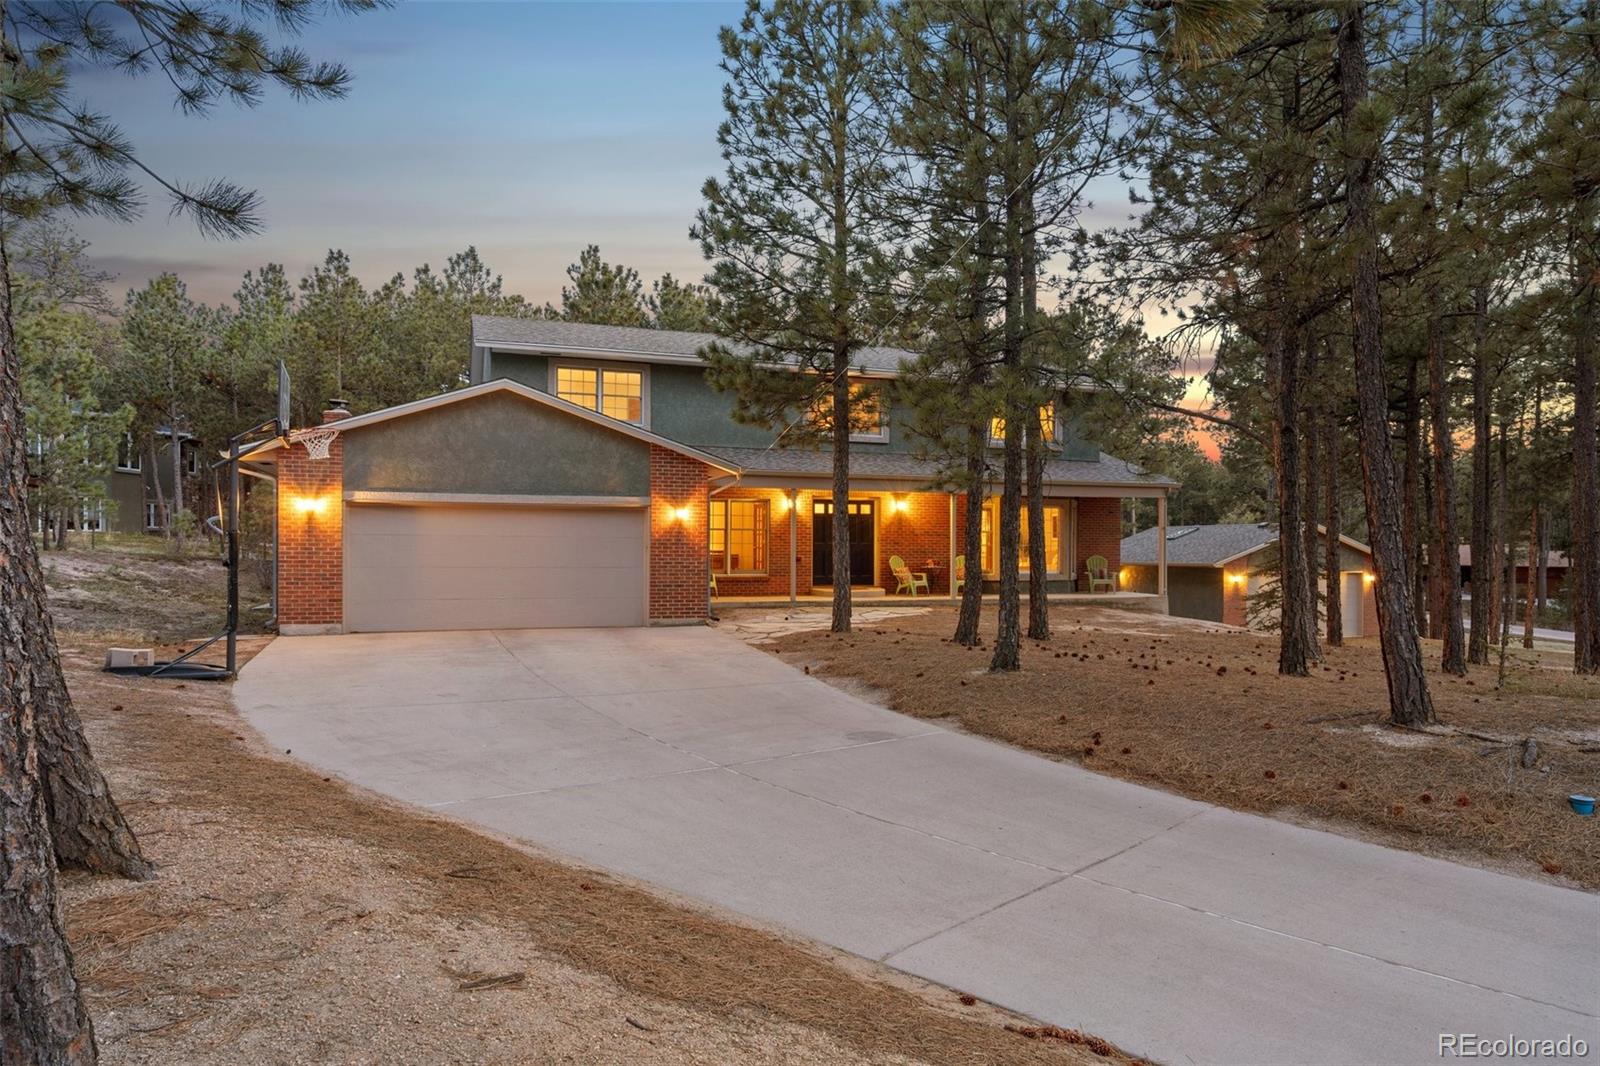 17725  smugglers road, monument sold home. Closed on 2024-05-15 for $789,000.